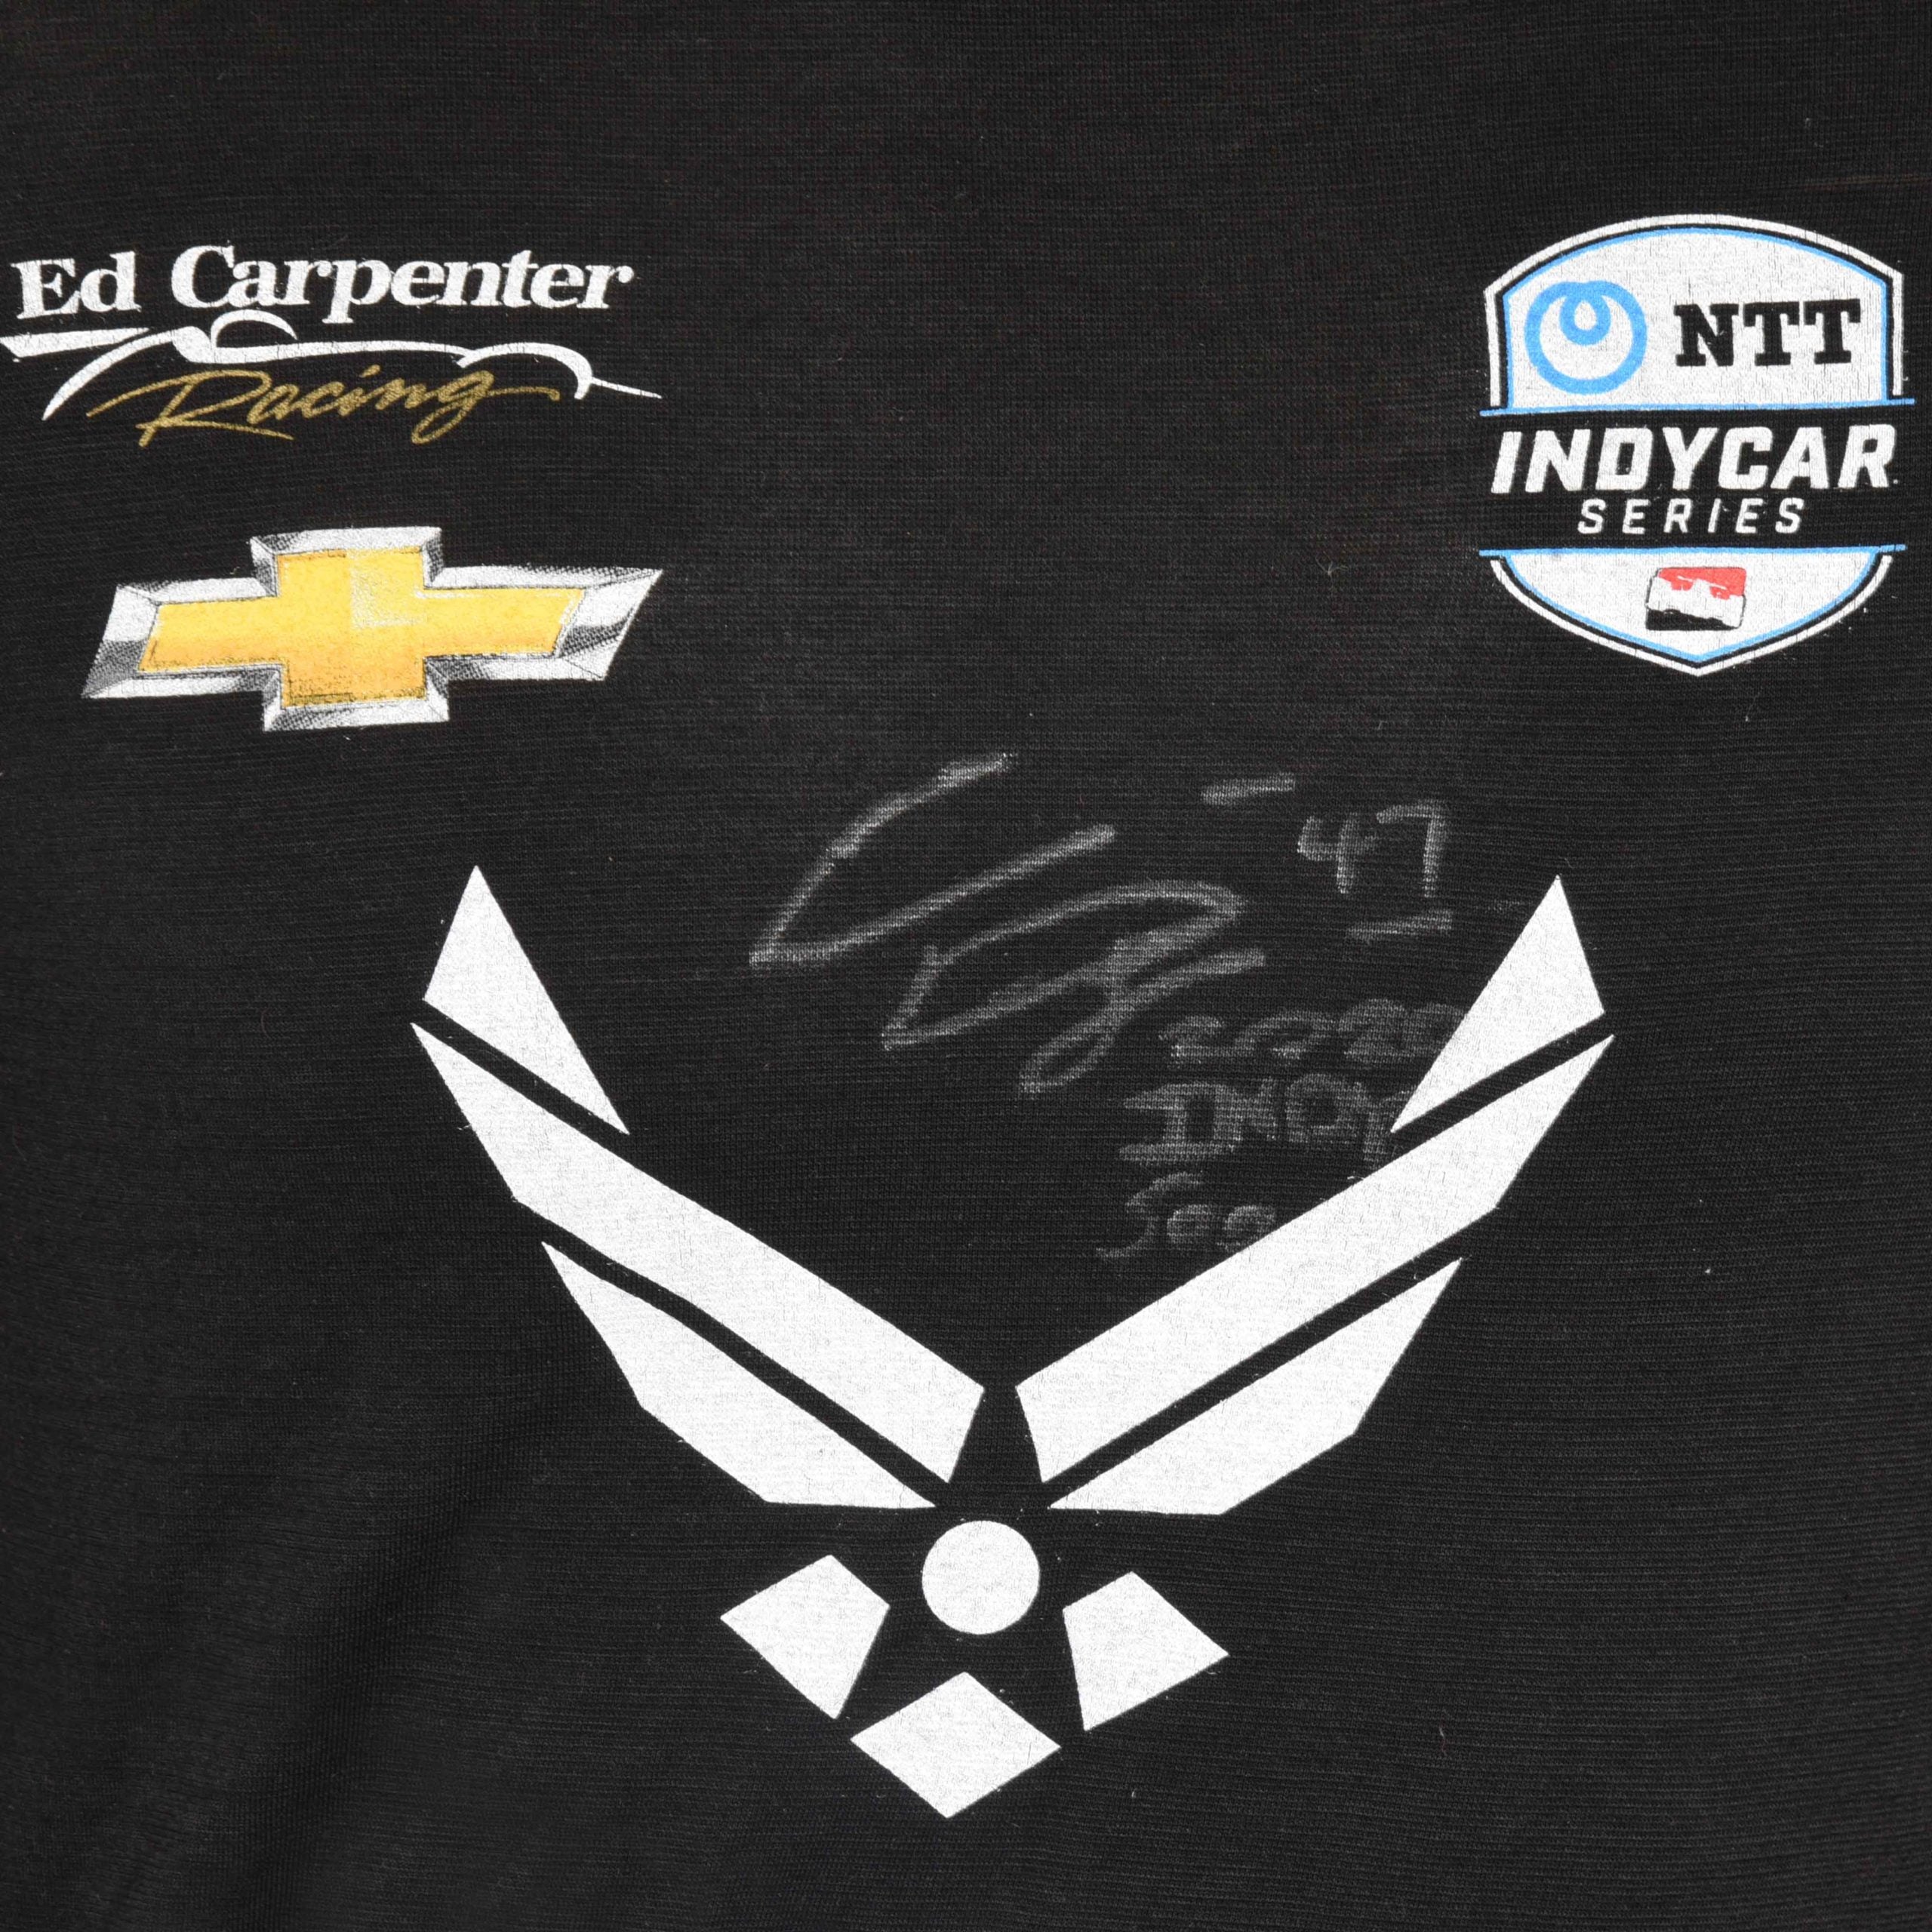 2020 Conor Daly Signed Race Used Indy 500 Ed Carpenter Racing IndyCar Nomex